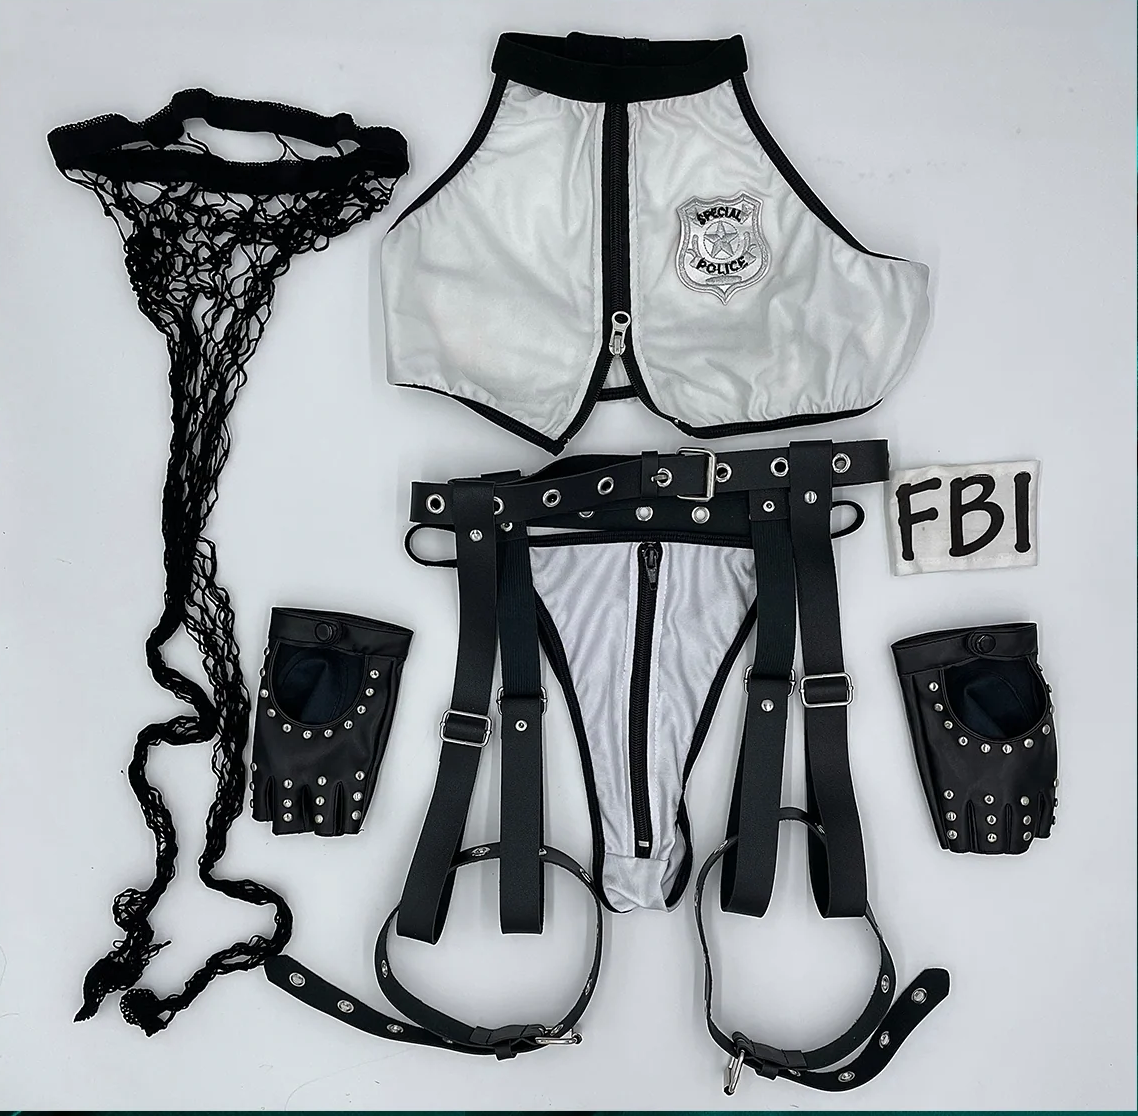 BodyZone Role Play Frisky Body Inspector FBI 6 pc Top with Thong & Garter Costume Set Black/White